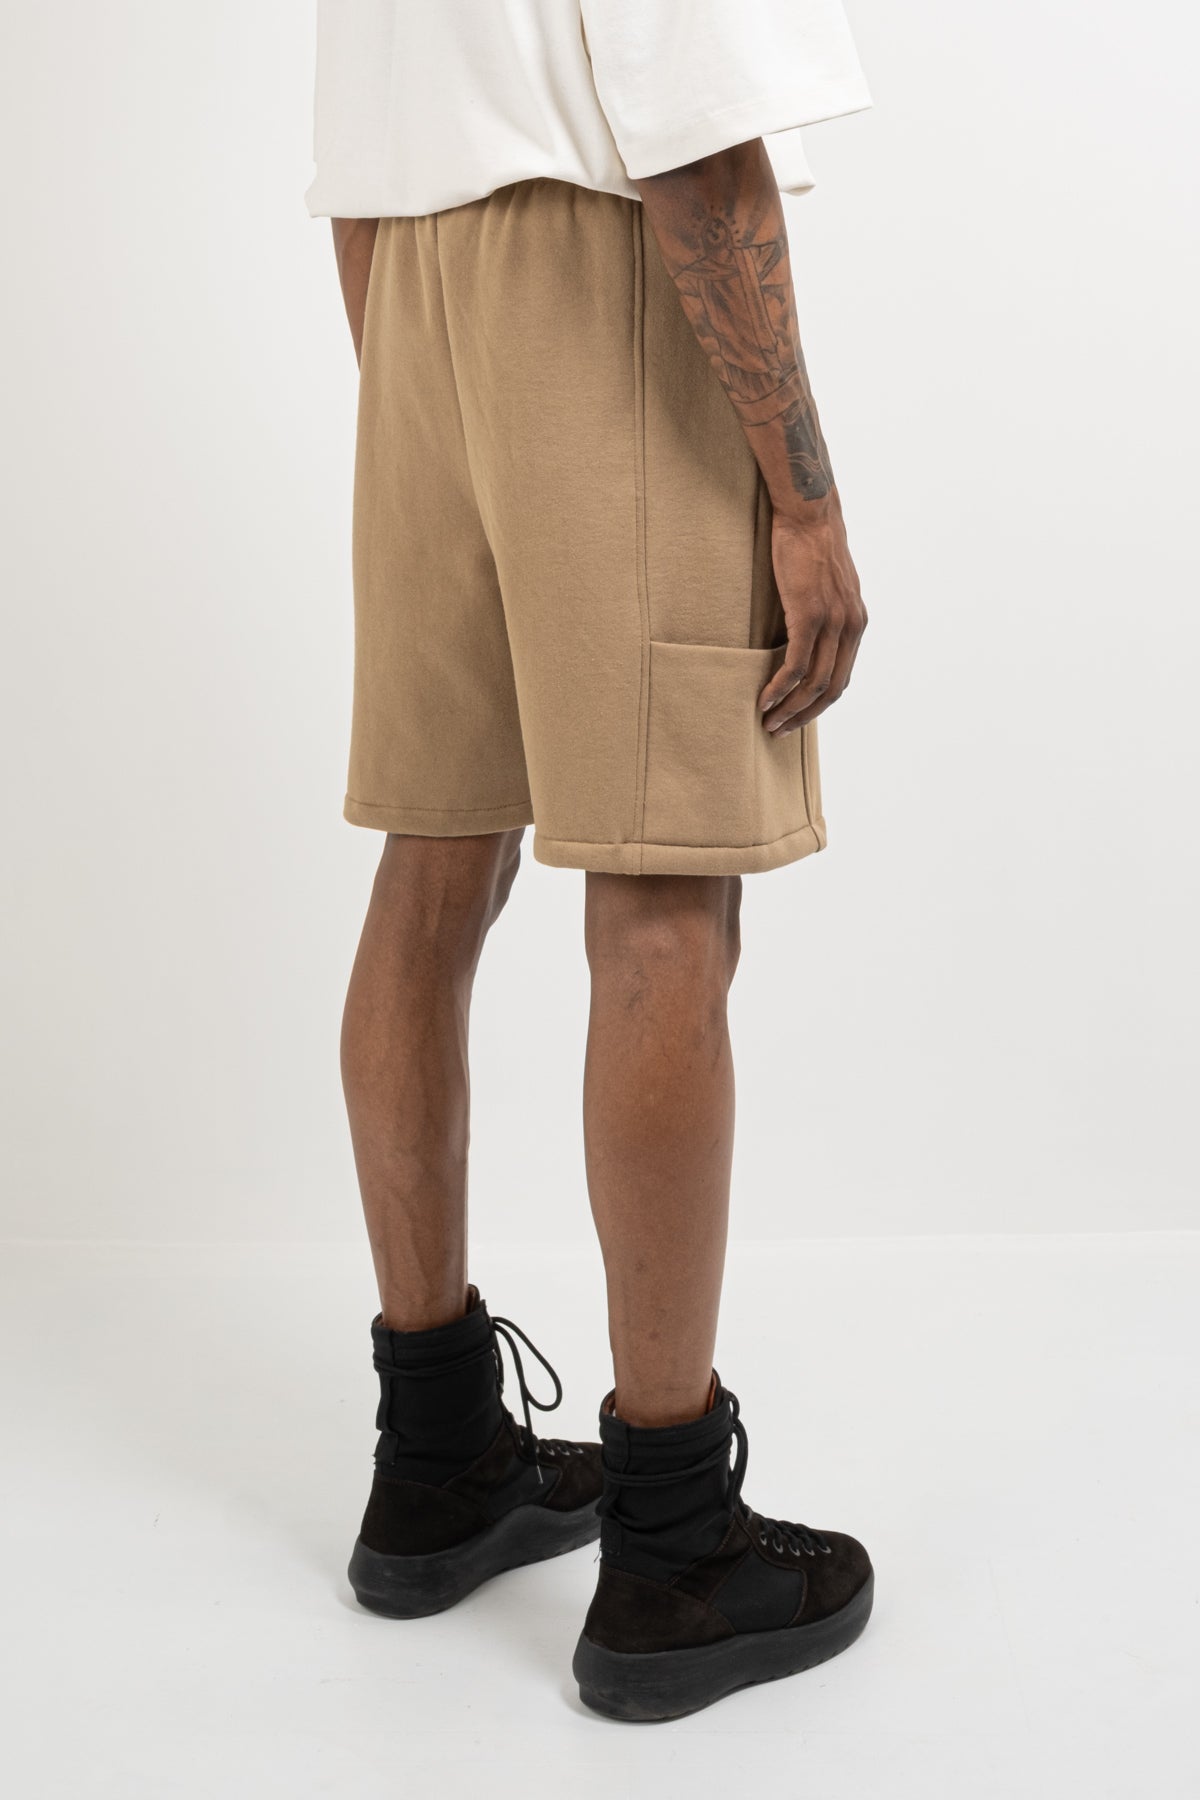 CURTIS SWEAT SHORTS - MERCY HOUSE